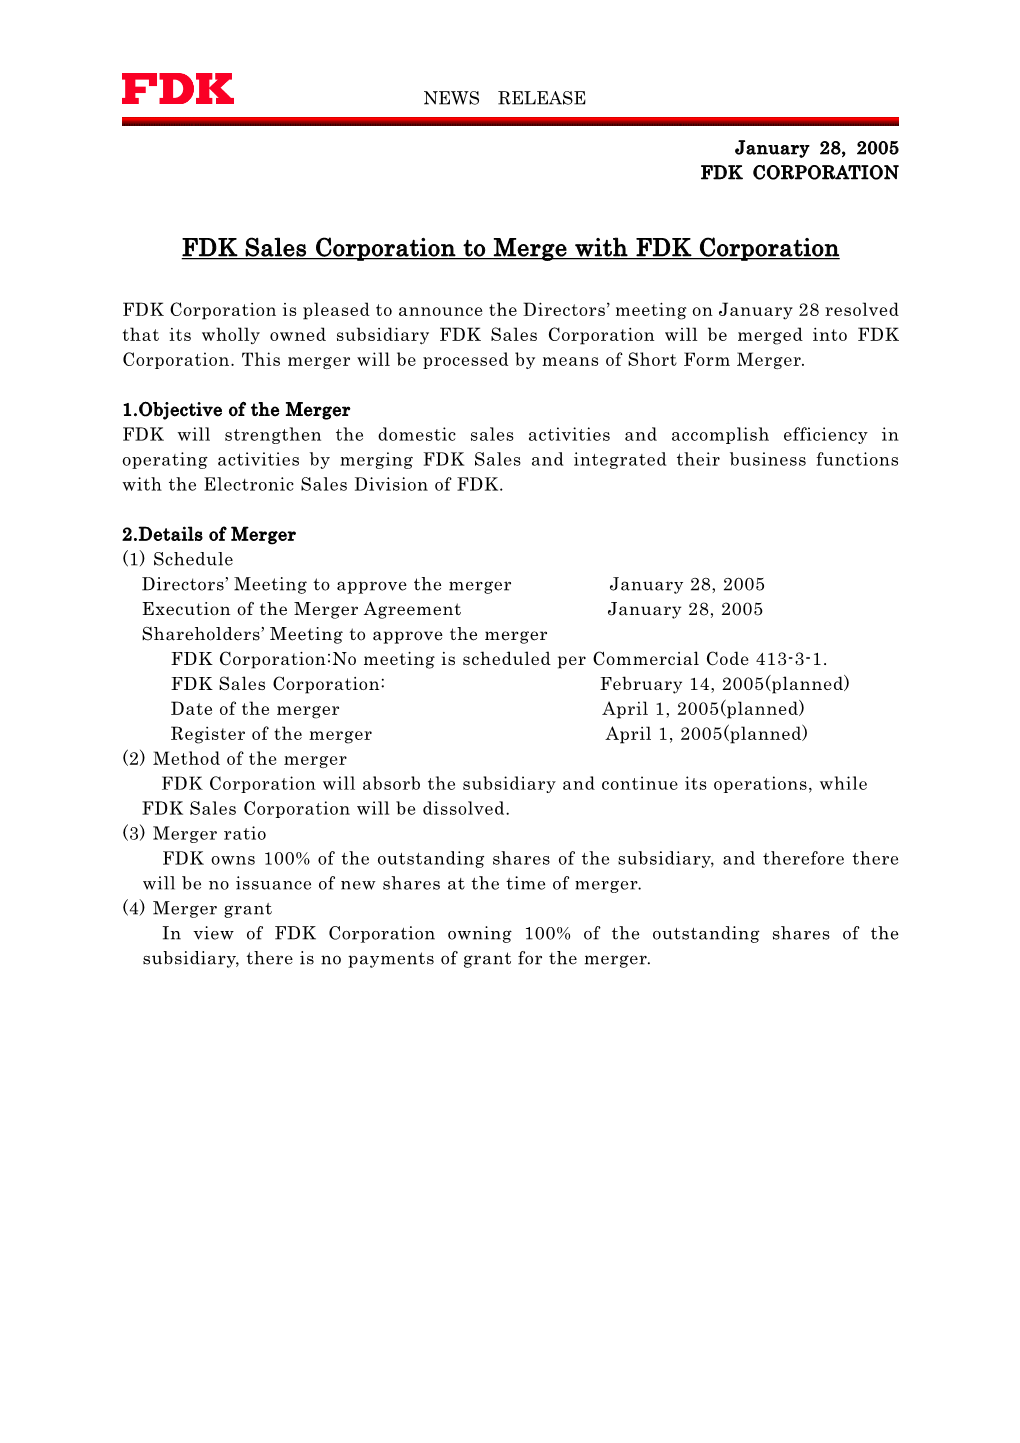 FDK Sales Corporation to Merge with FDK Corporation